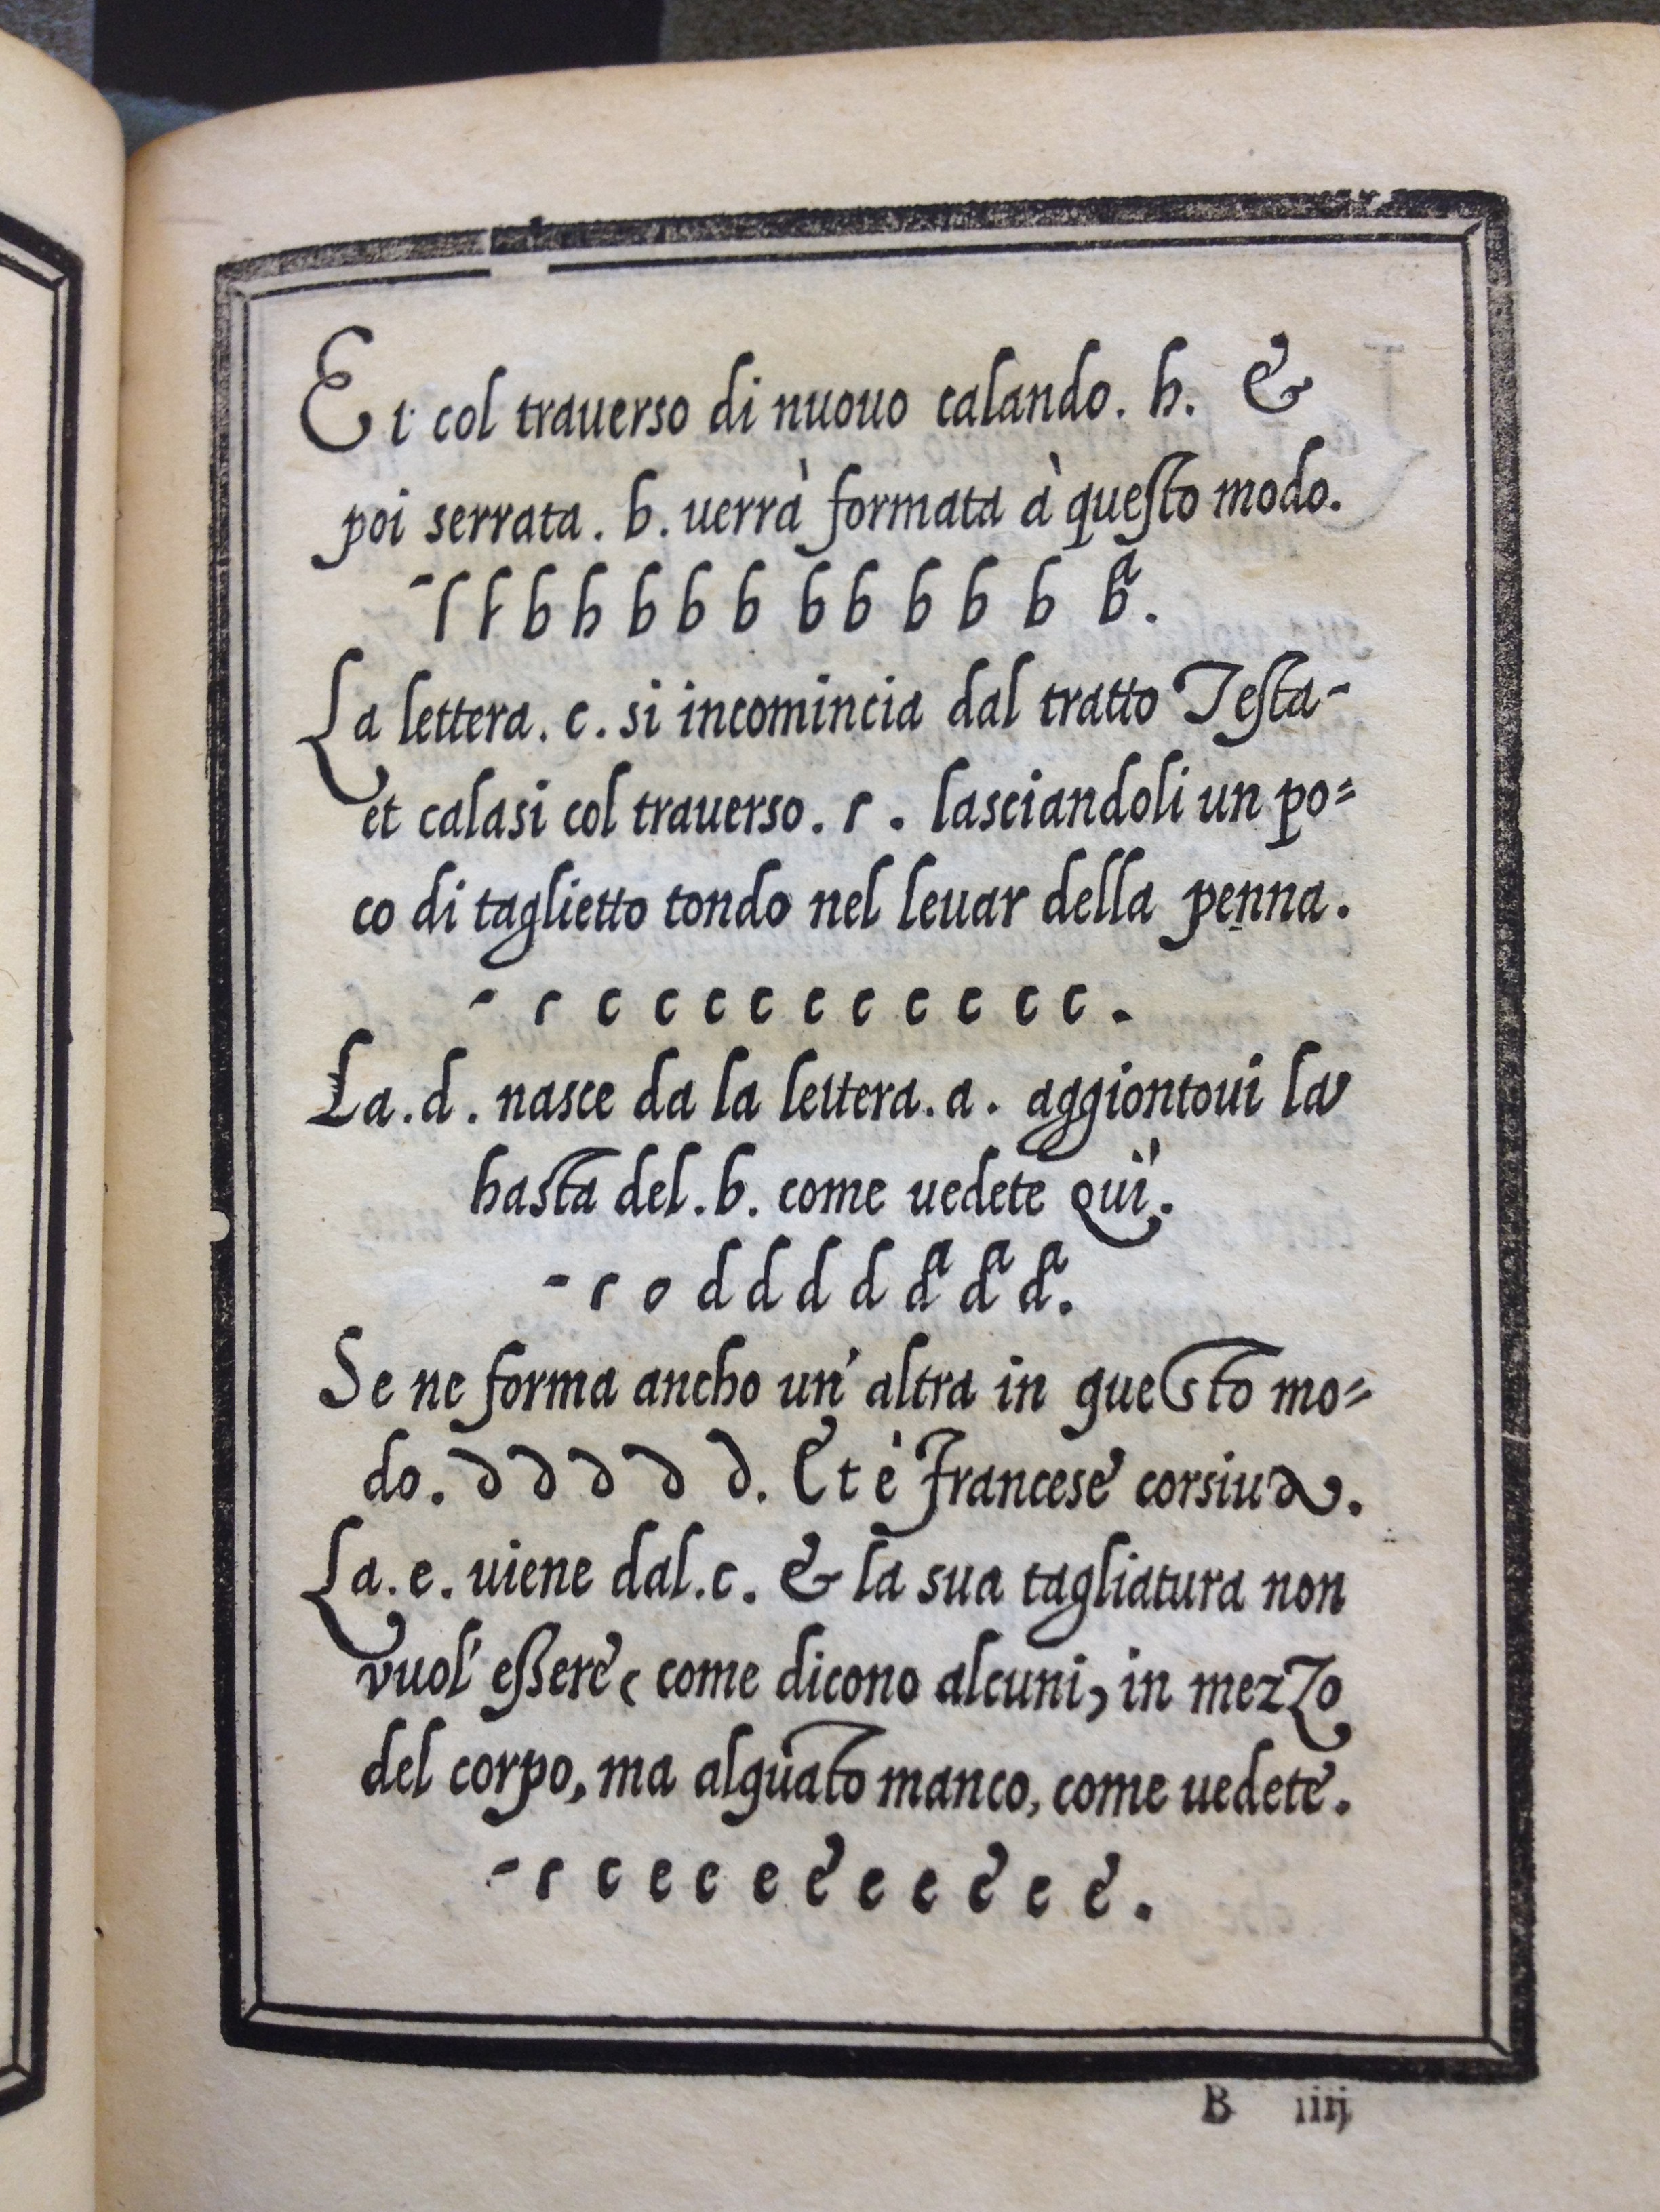 Stroke sequence in the Bancroft Library's 1588 Palatino